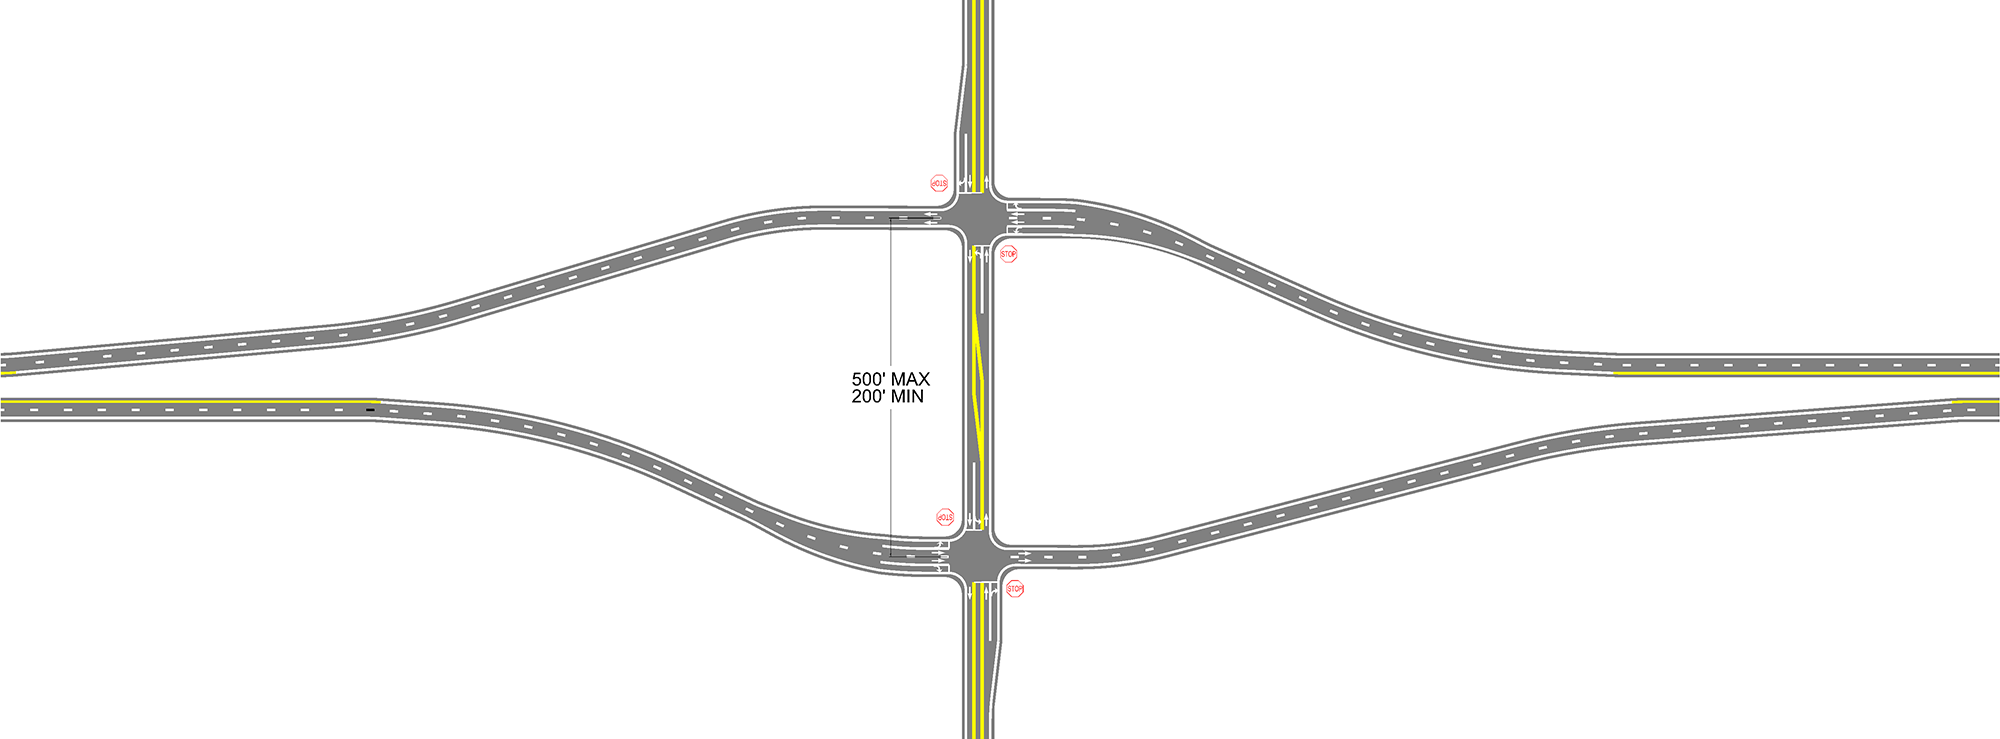 Detailed graphic of an at-grade intersection.